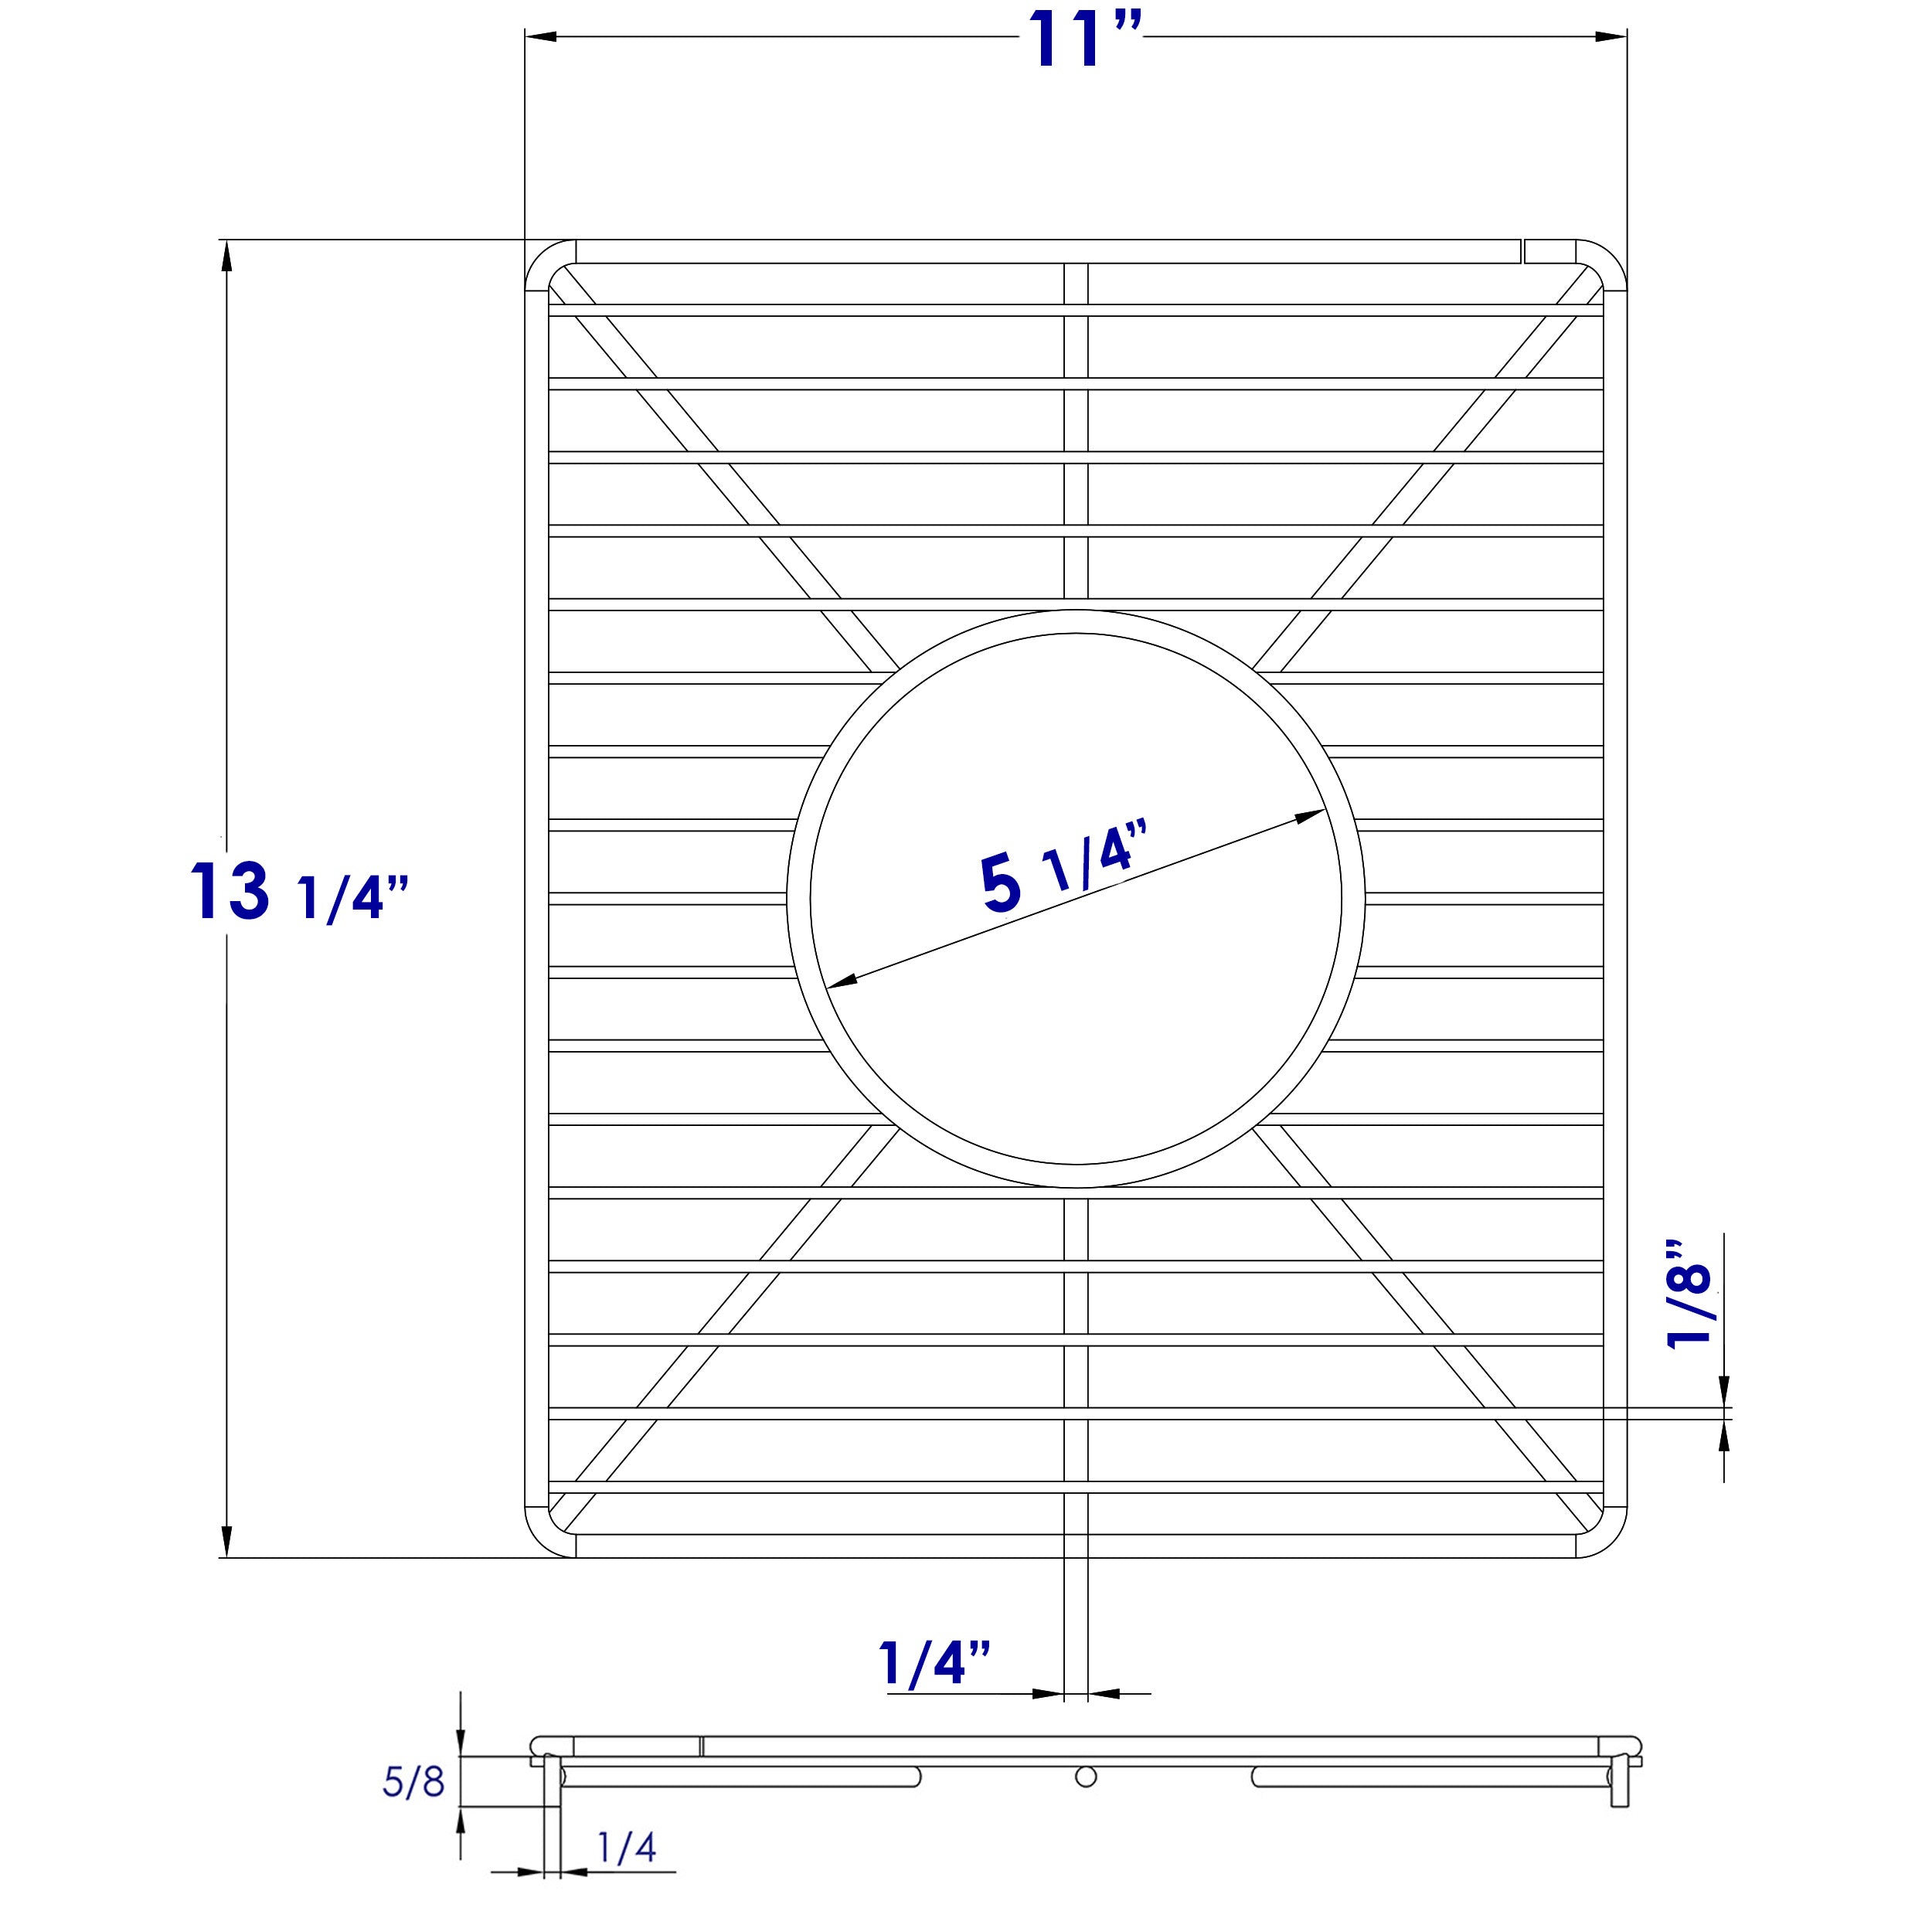 ALFI Brand - Stainless steel kitchen sink grid for small side of AB3618DB. AB3618ARCH | ABGR3618S